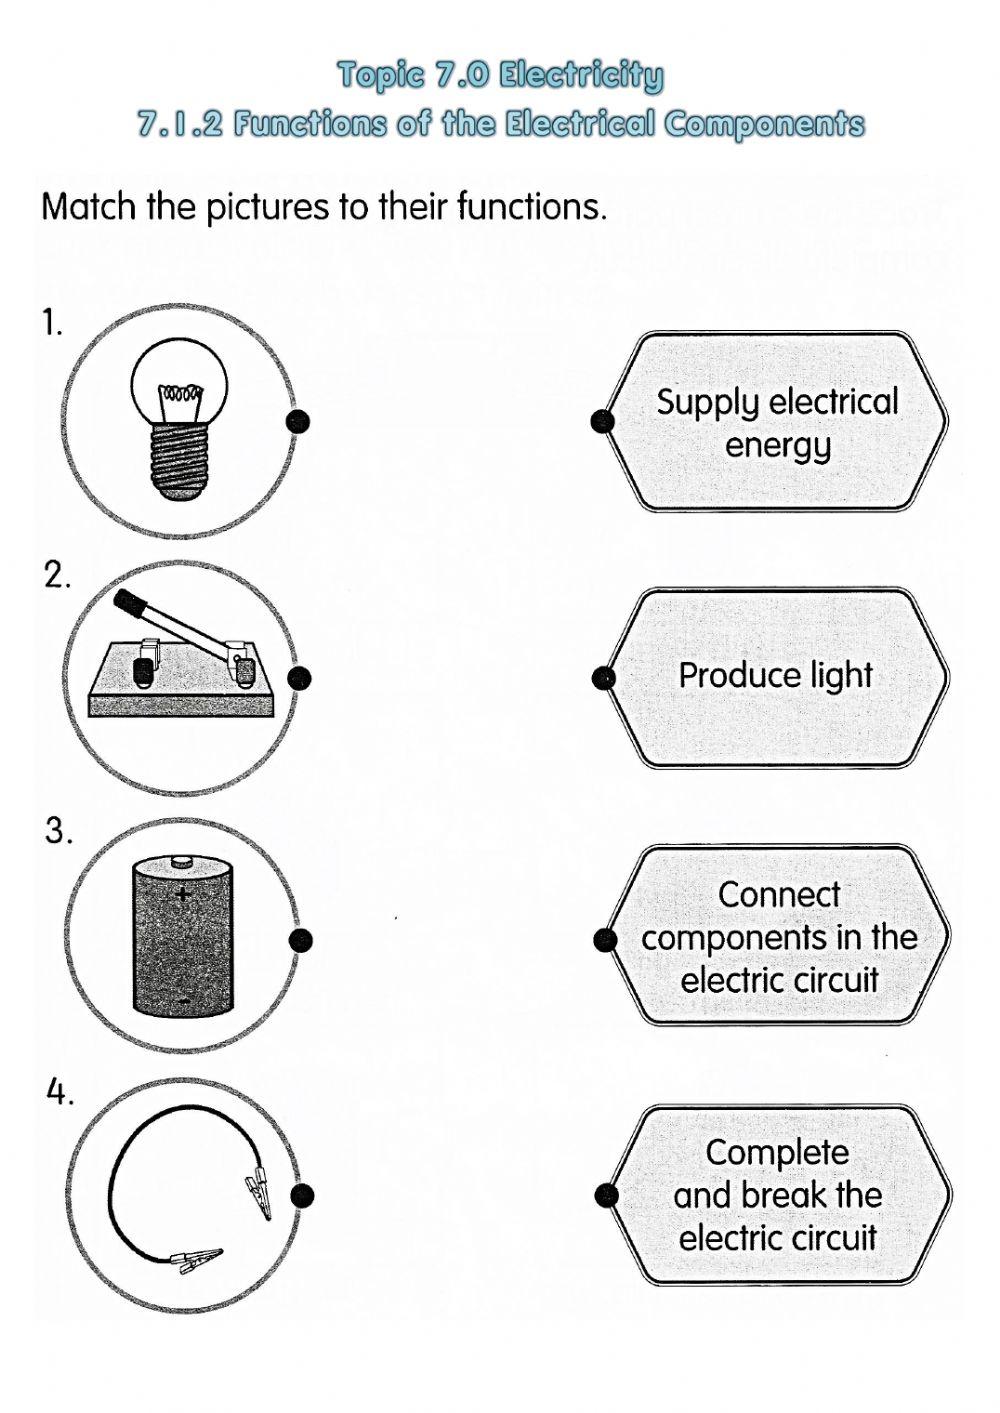 Science Year 2 PdPRW21 Monday 30.06.2021 - Unit 7 Electricity - Electrical Components